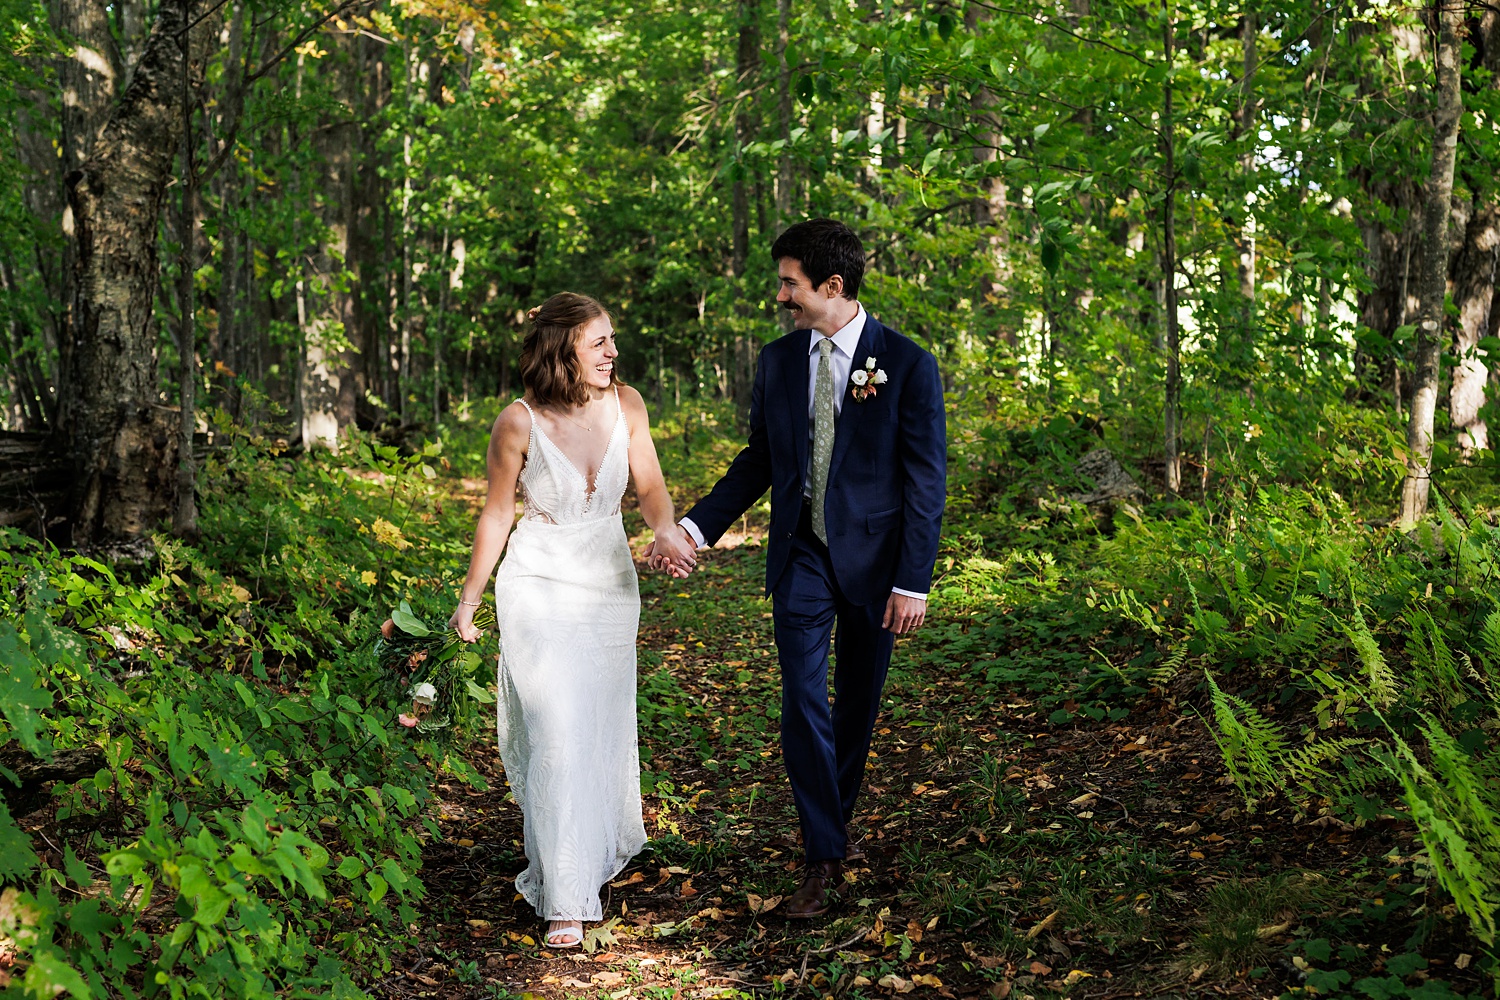 The couple walk down a wooded path on their wedding day